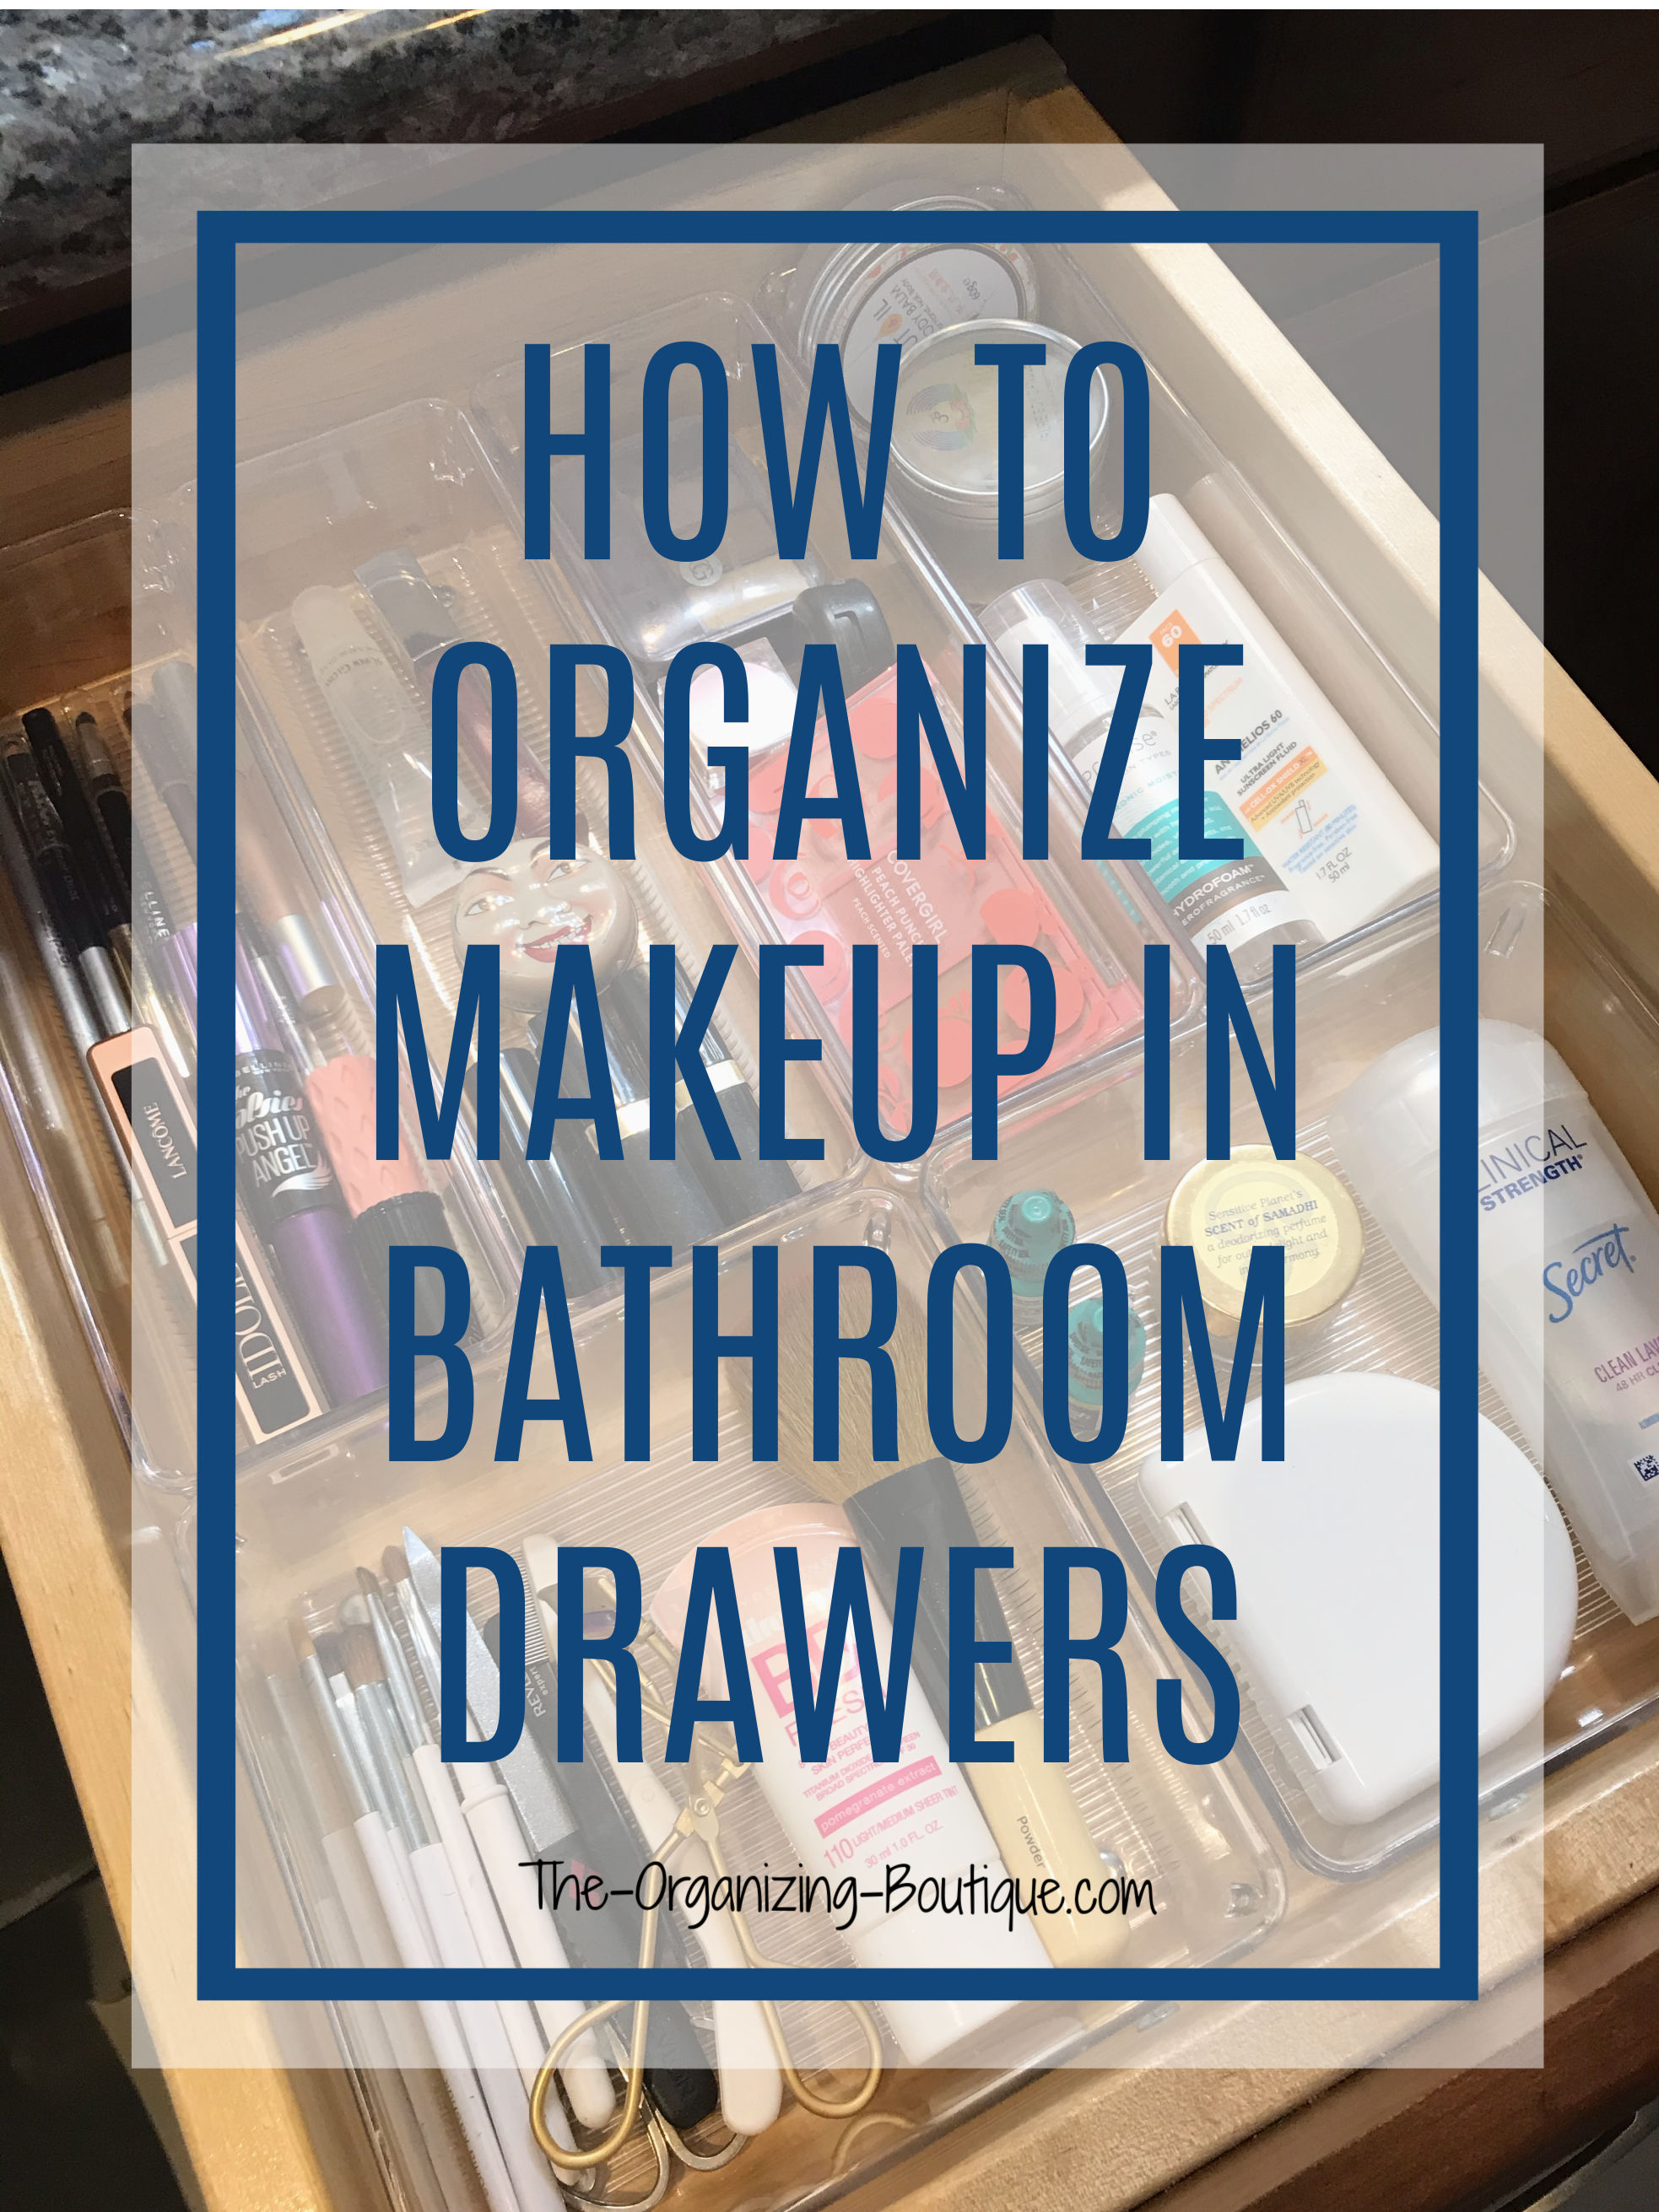 Looking for makeup drawer organizer ideas? Here are some options for getting the bathroom drawers in order.